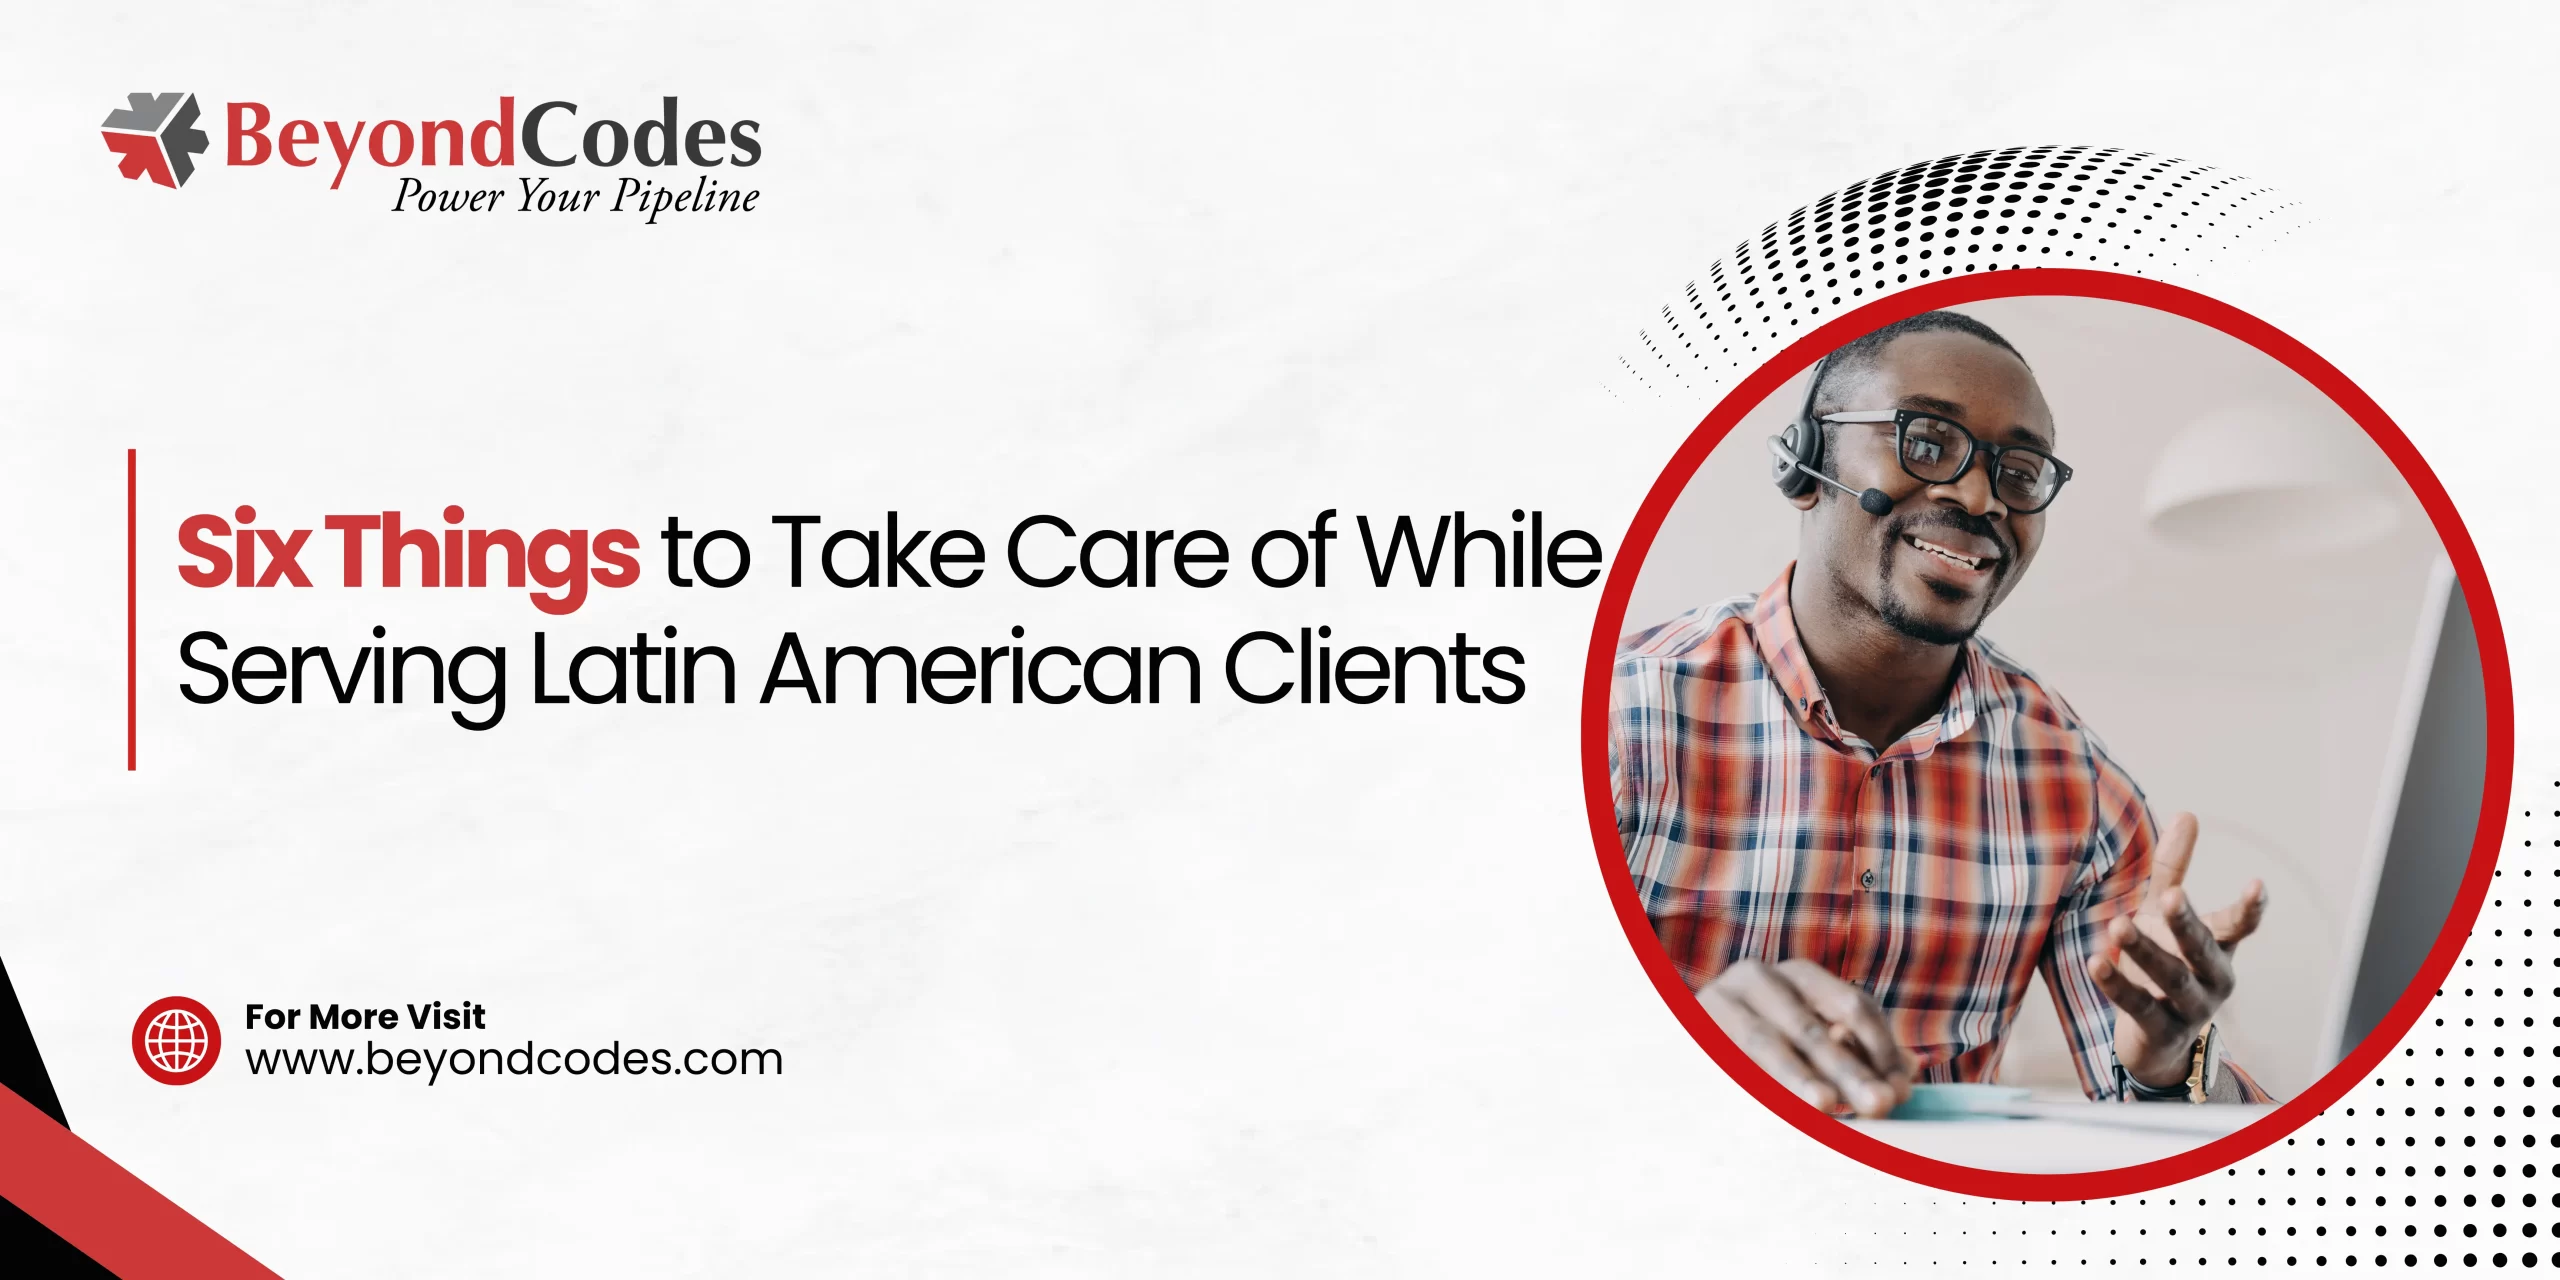 Six Things to Take Care of While Serving Latin American Clients